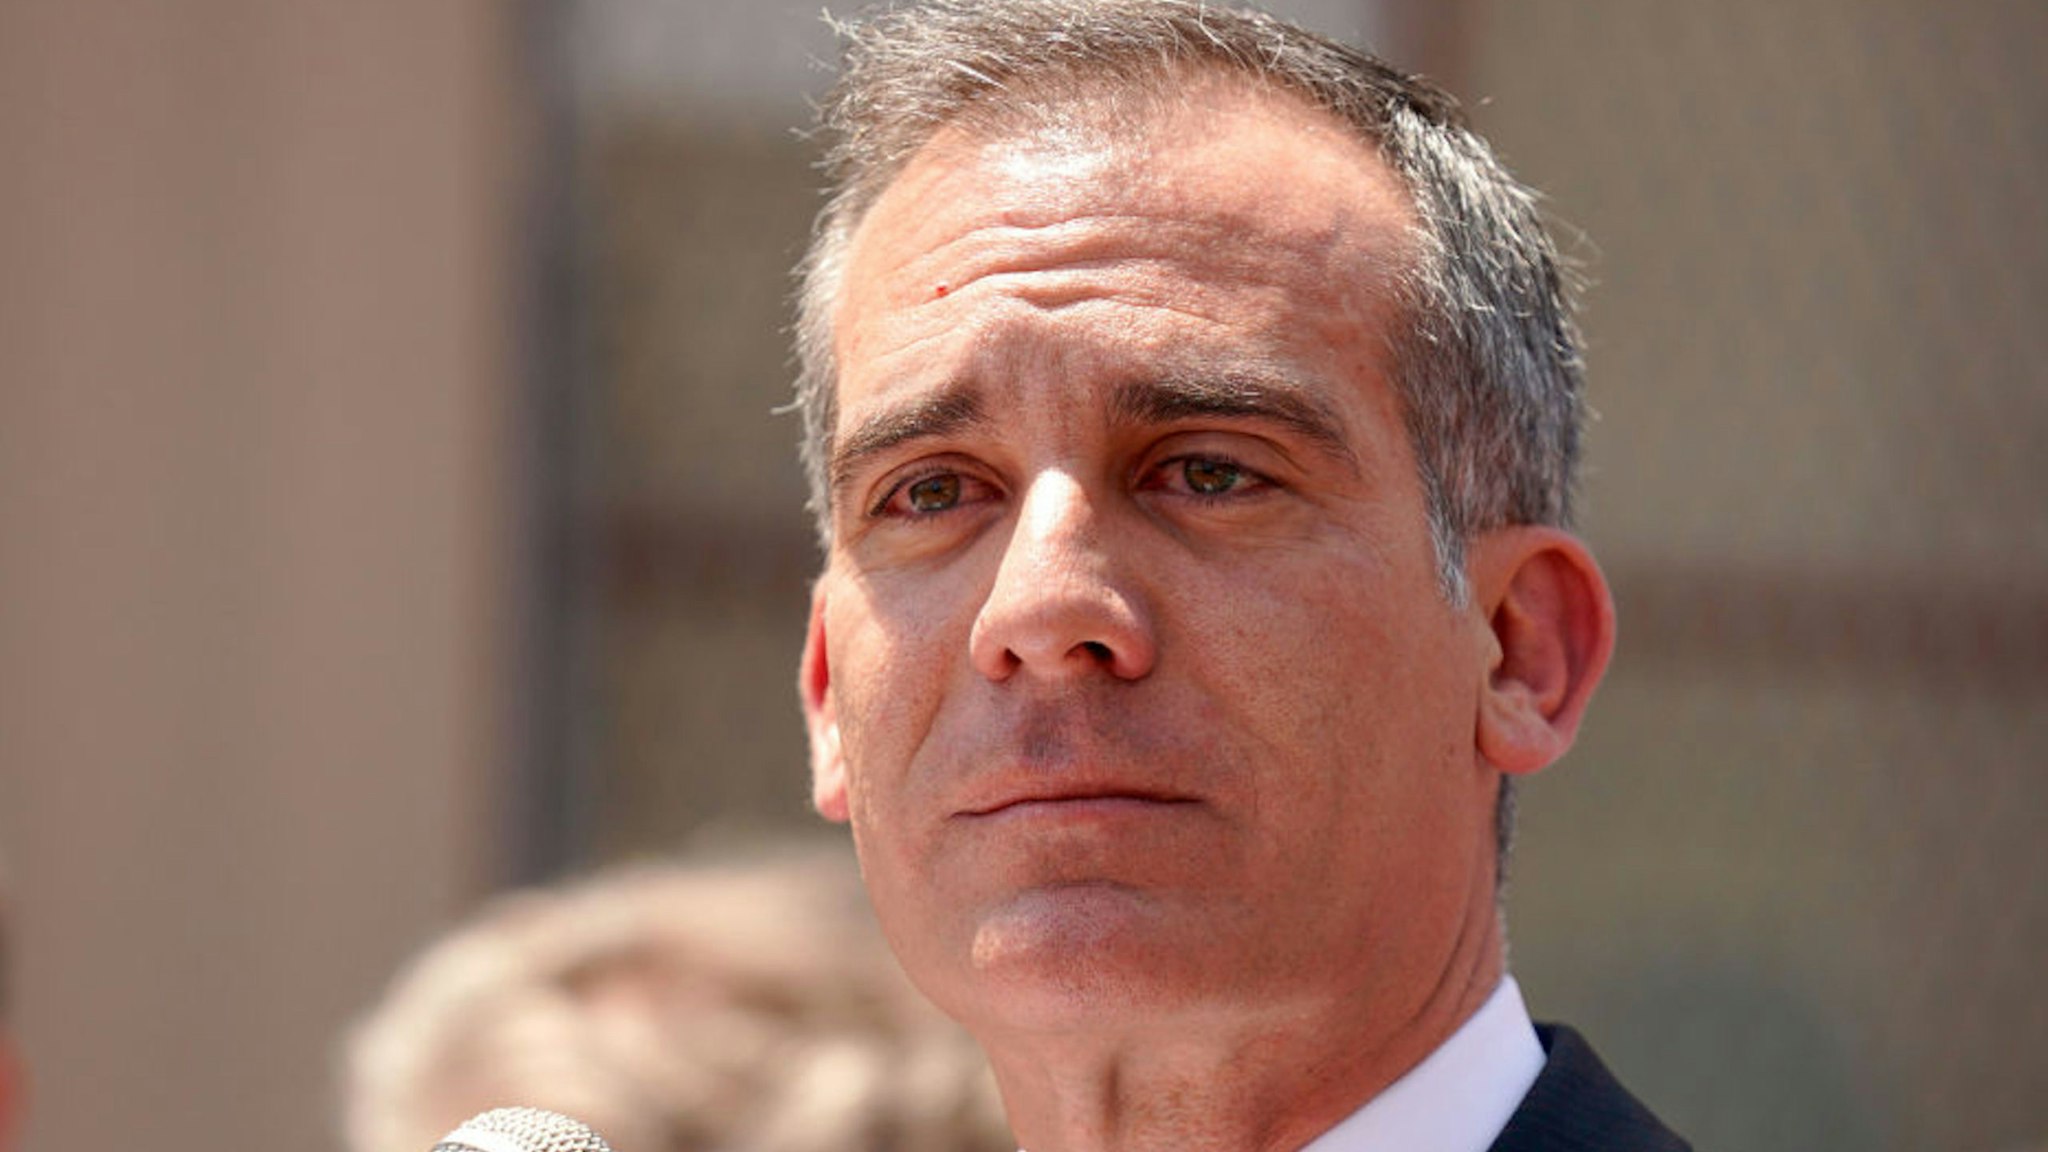 LOS ANGELES, CA - JUNE 05: Los Angeles Mayor Eric Garcetti eyes water as he gets emotional while speaking during a press conference at Western Avenue Elementary School in Los Angeles on Wednesday, June 5, 2019. Garcetti, school board members and labor leaders gathered to discuss the loss of Measure EE in the polls and how they will fight to find money for the school district.